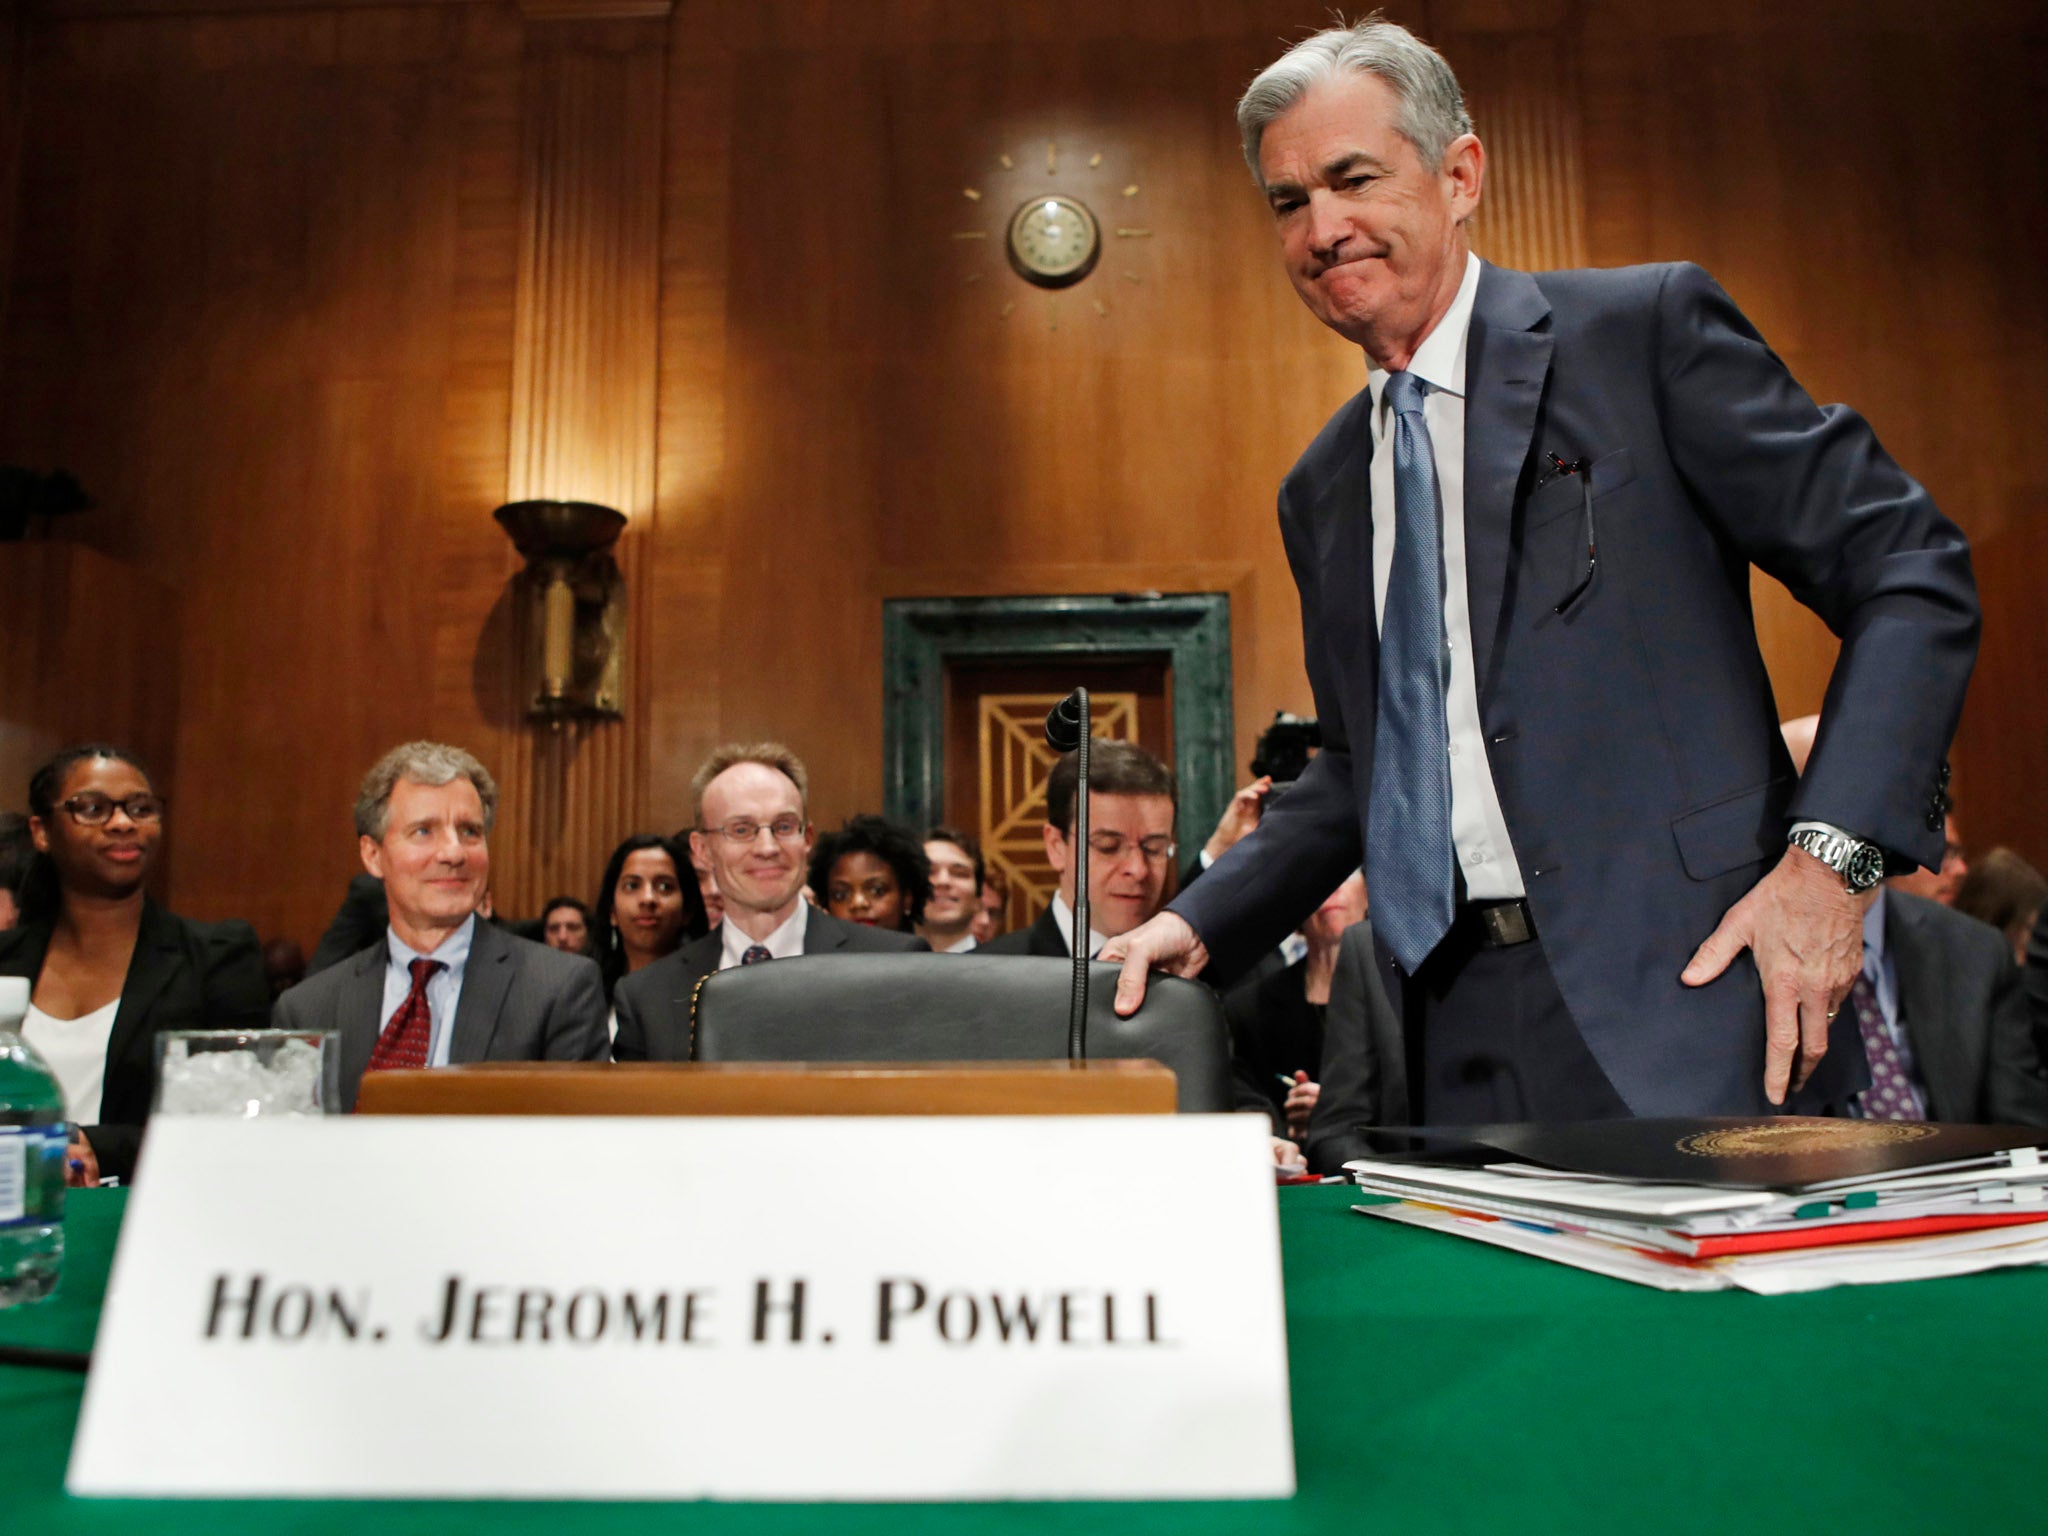 Federal Reserve Chairman Jerome Powell takes his seat before making the semiannual monetary policy report to the Senate Banking Committee on Capitol Hill in Washington.